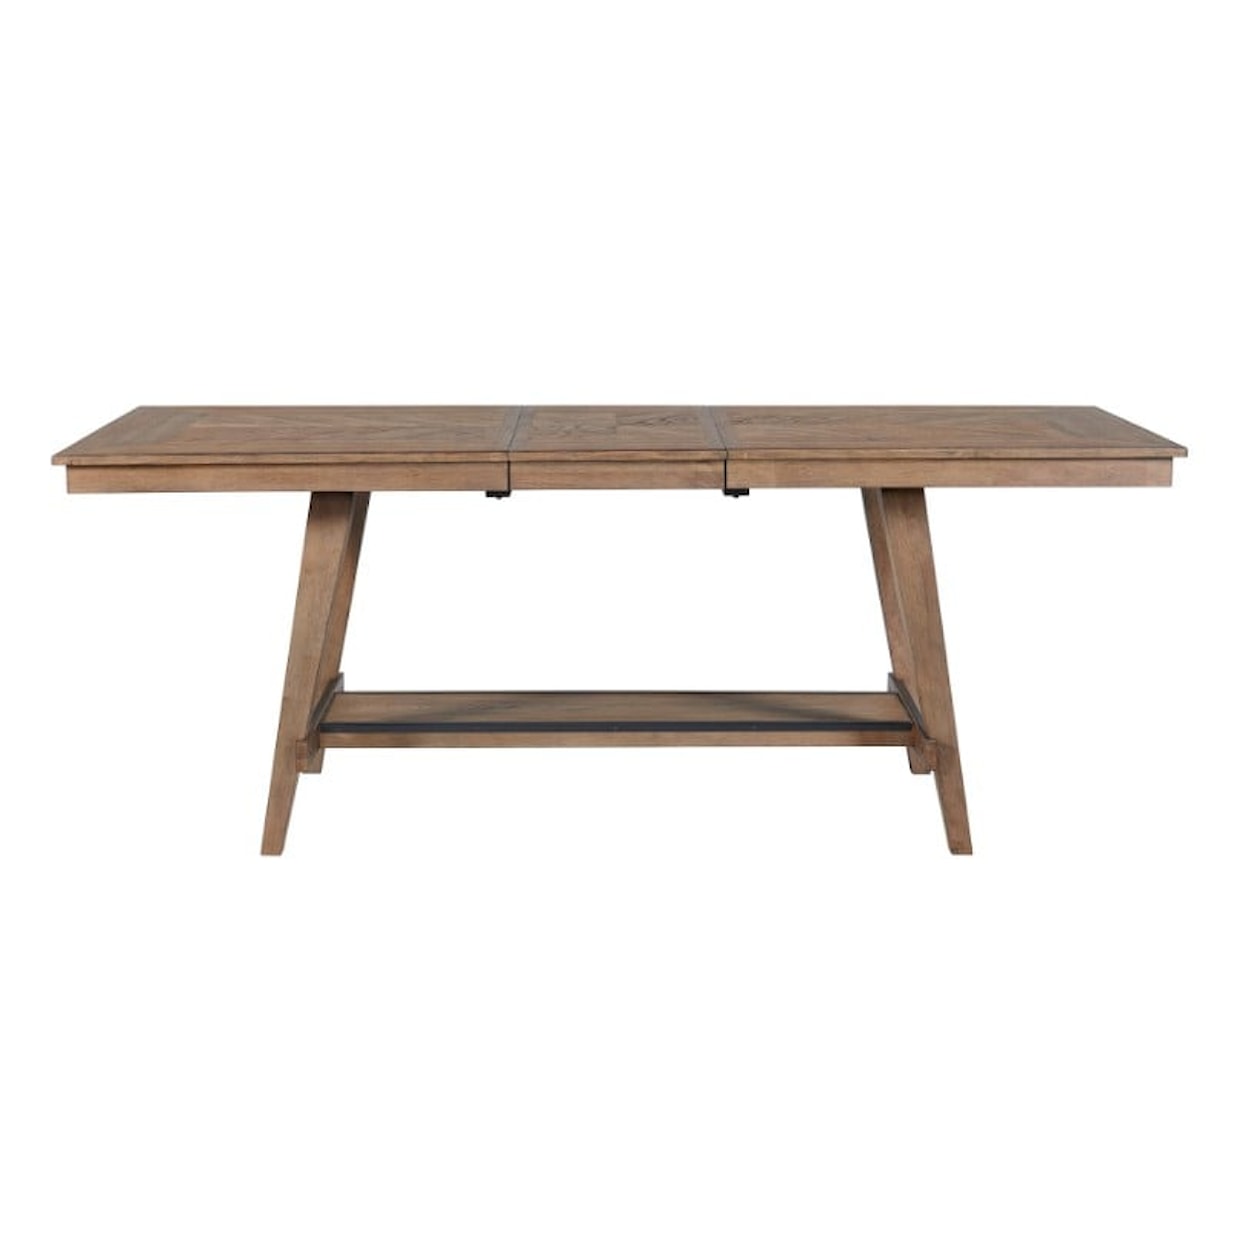 VFM Signature Oslo Counter-Height Dining Table